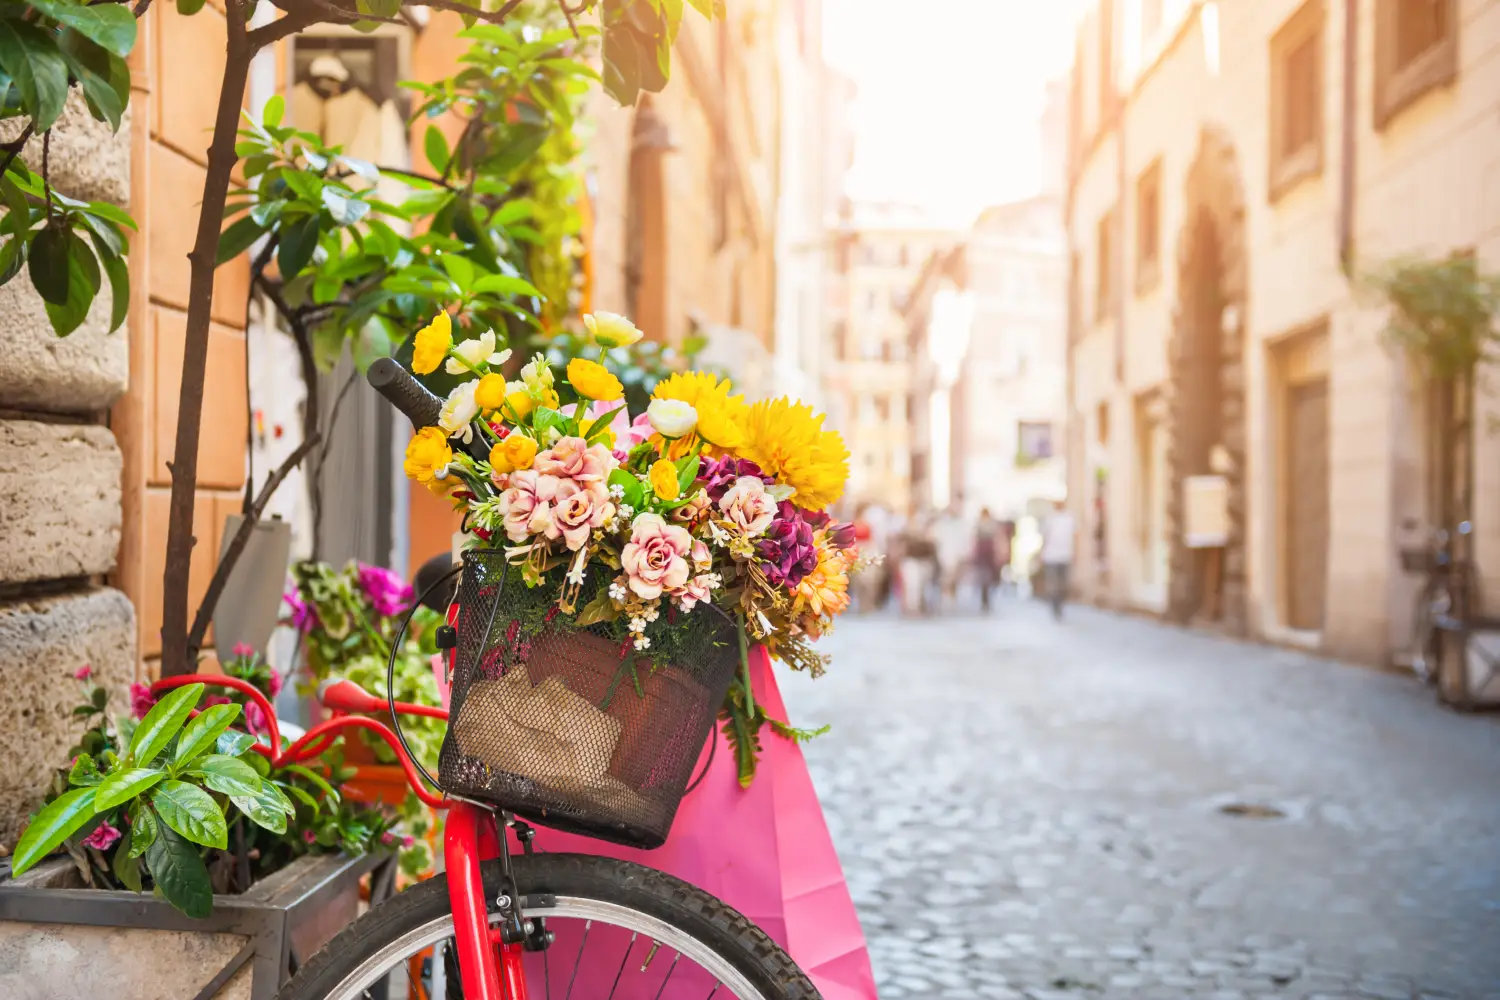 Ferry to Rome - Bicycle with flowers in the old street in Rome, Italy.